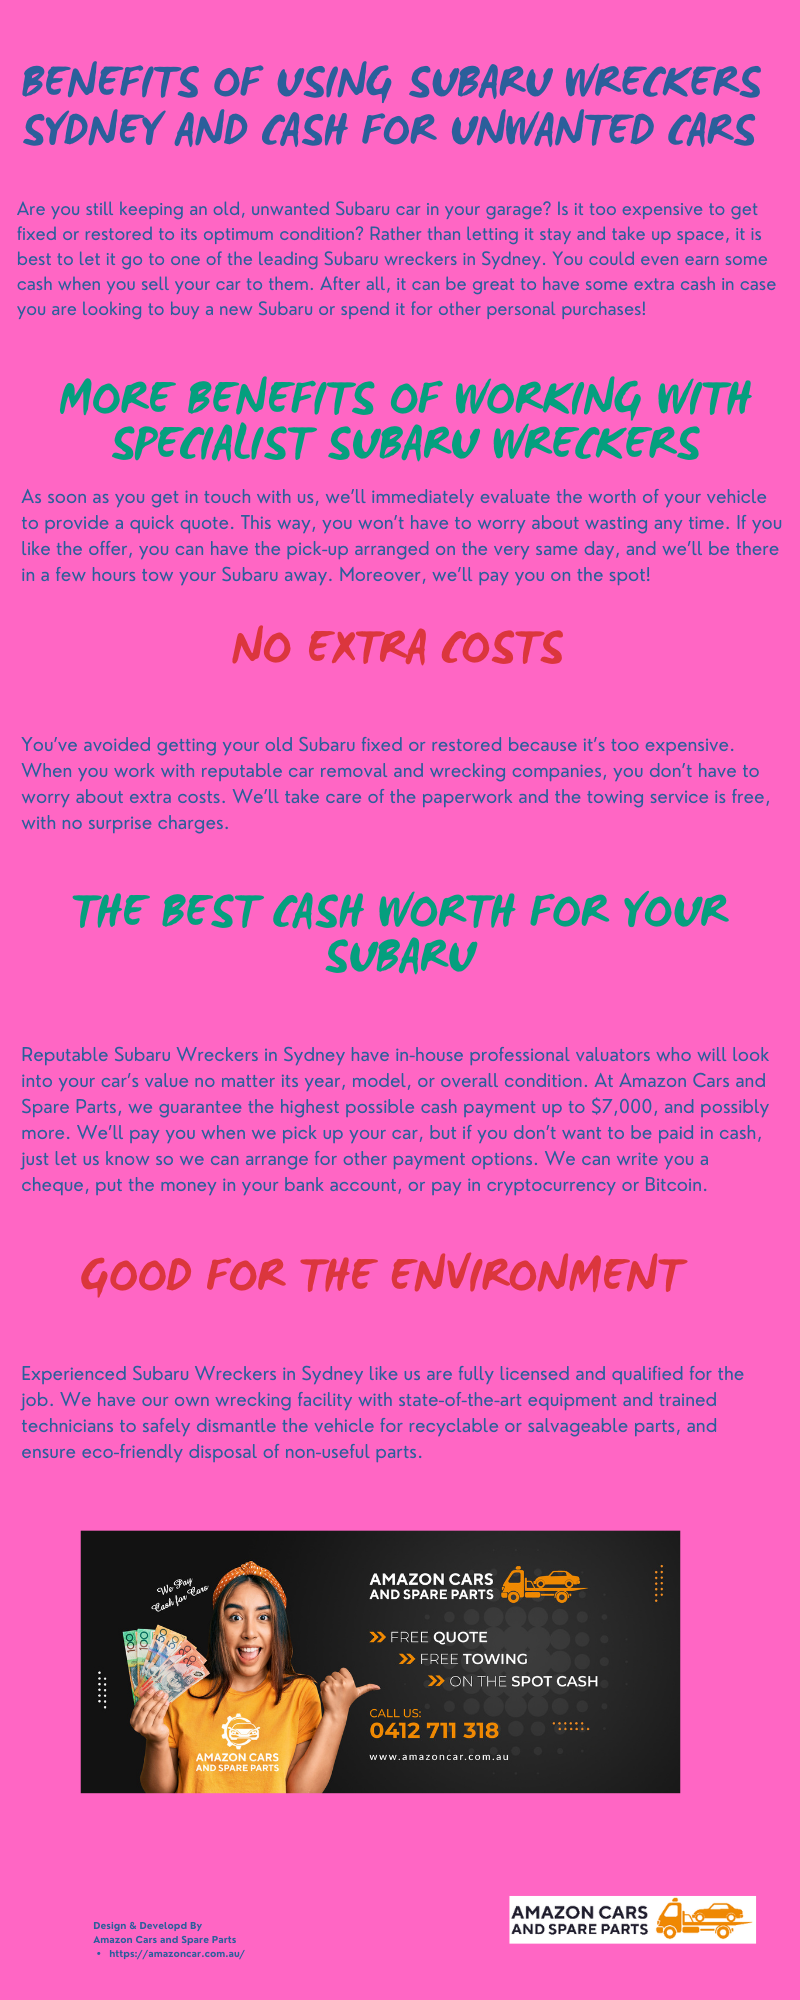 Benefits of Using Subaru Wreckers Sydney and Cash for Unwanted Cars.png  by amazoncars